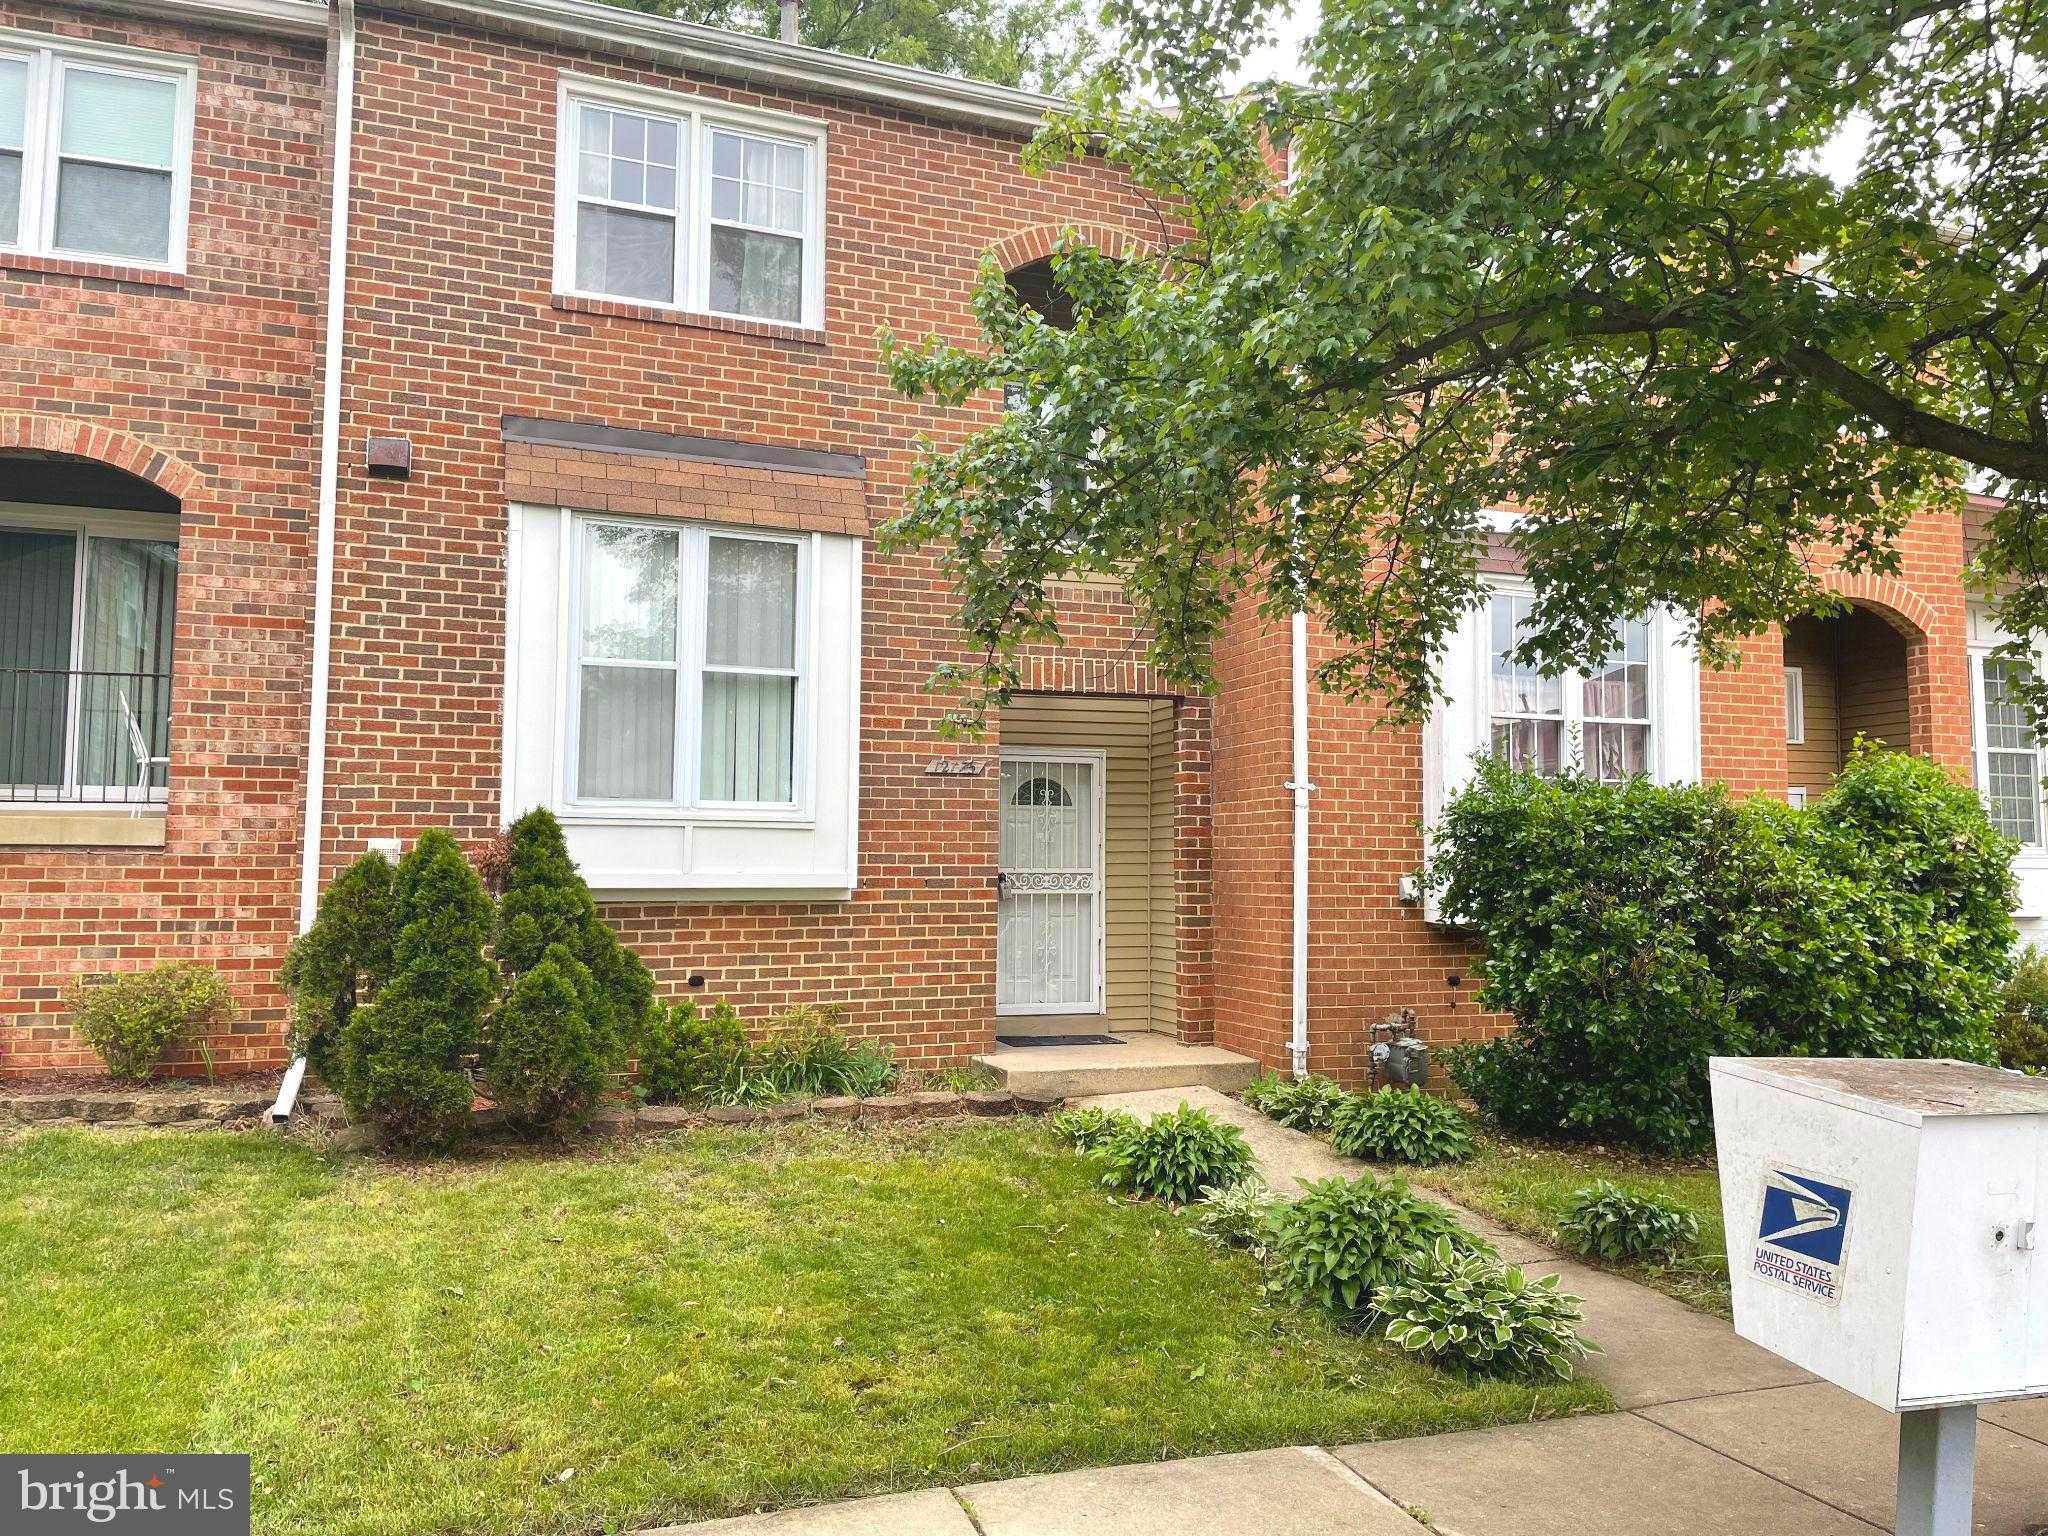 View BELTSVILLE, MD 20705 townhome